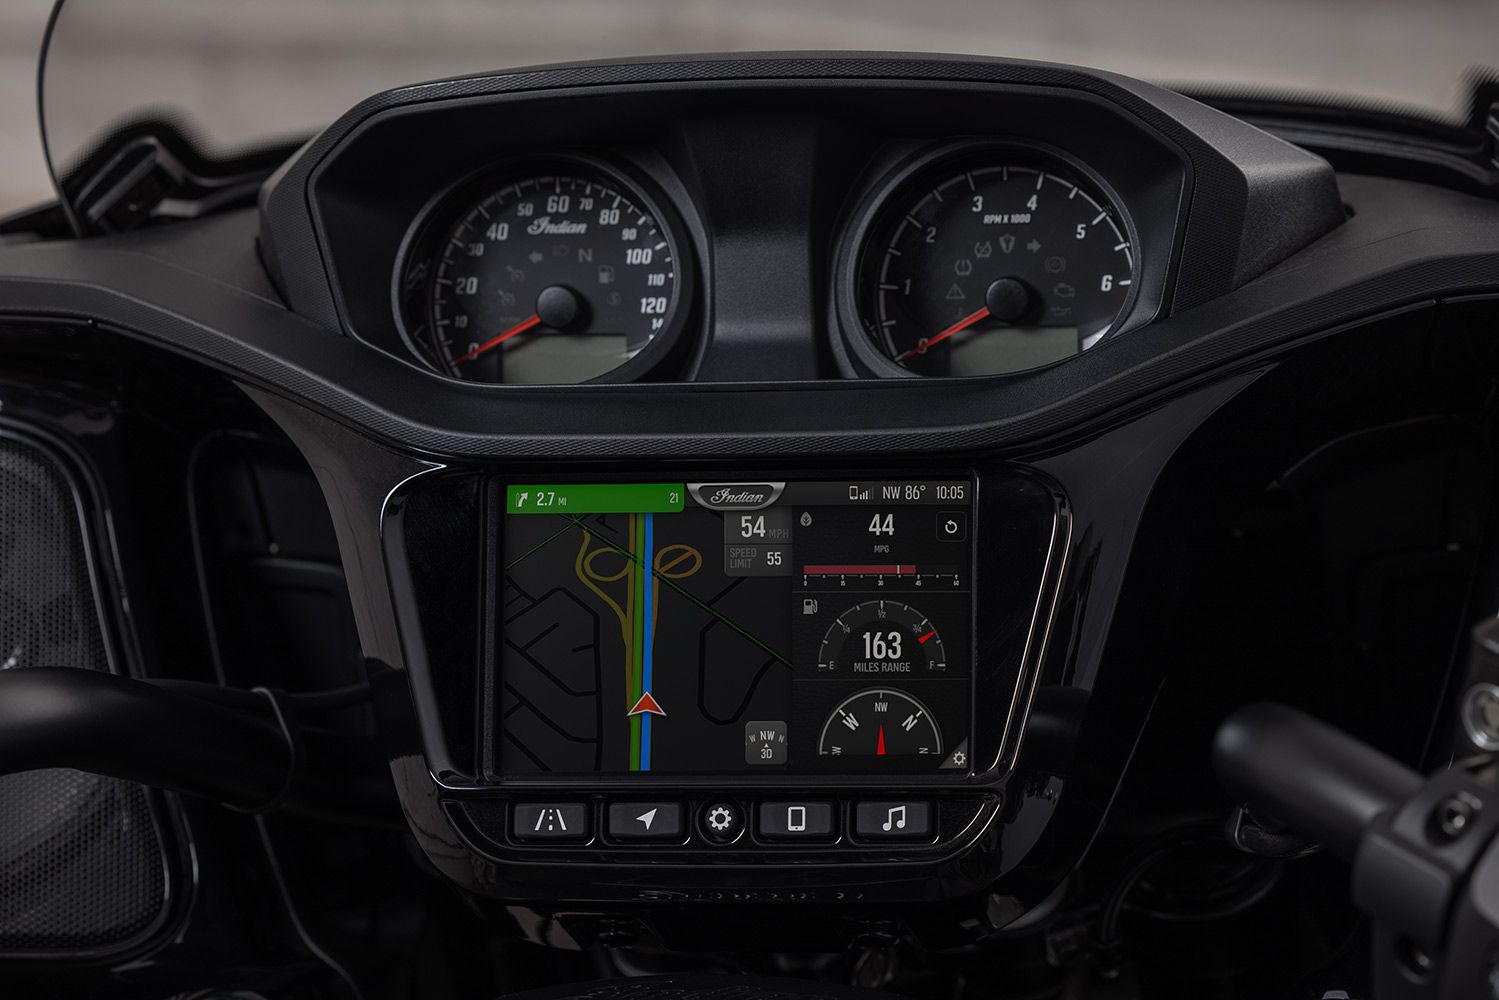 One of the updates includes a new speed-limit overlay in the Ride Command system.